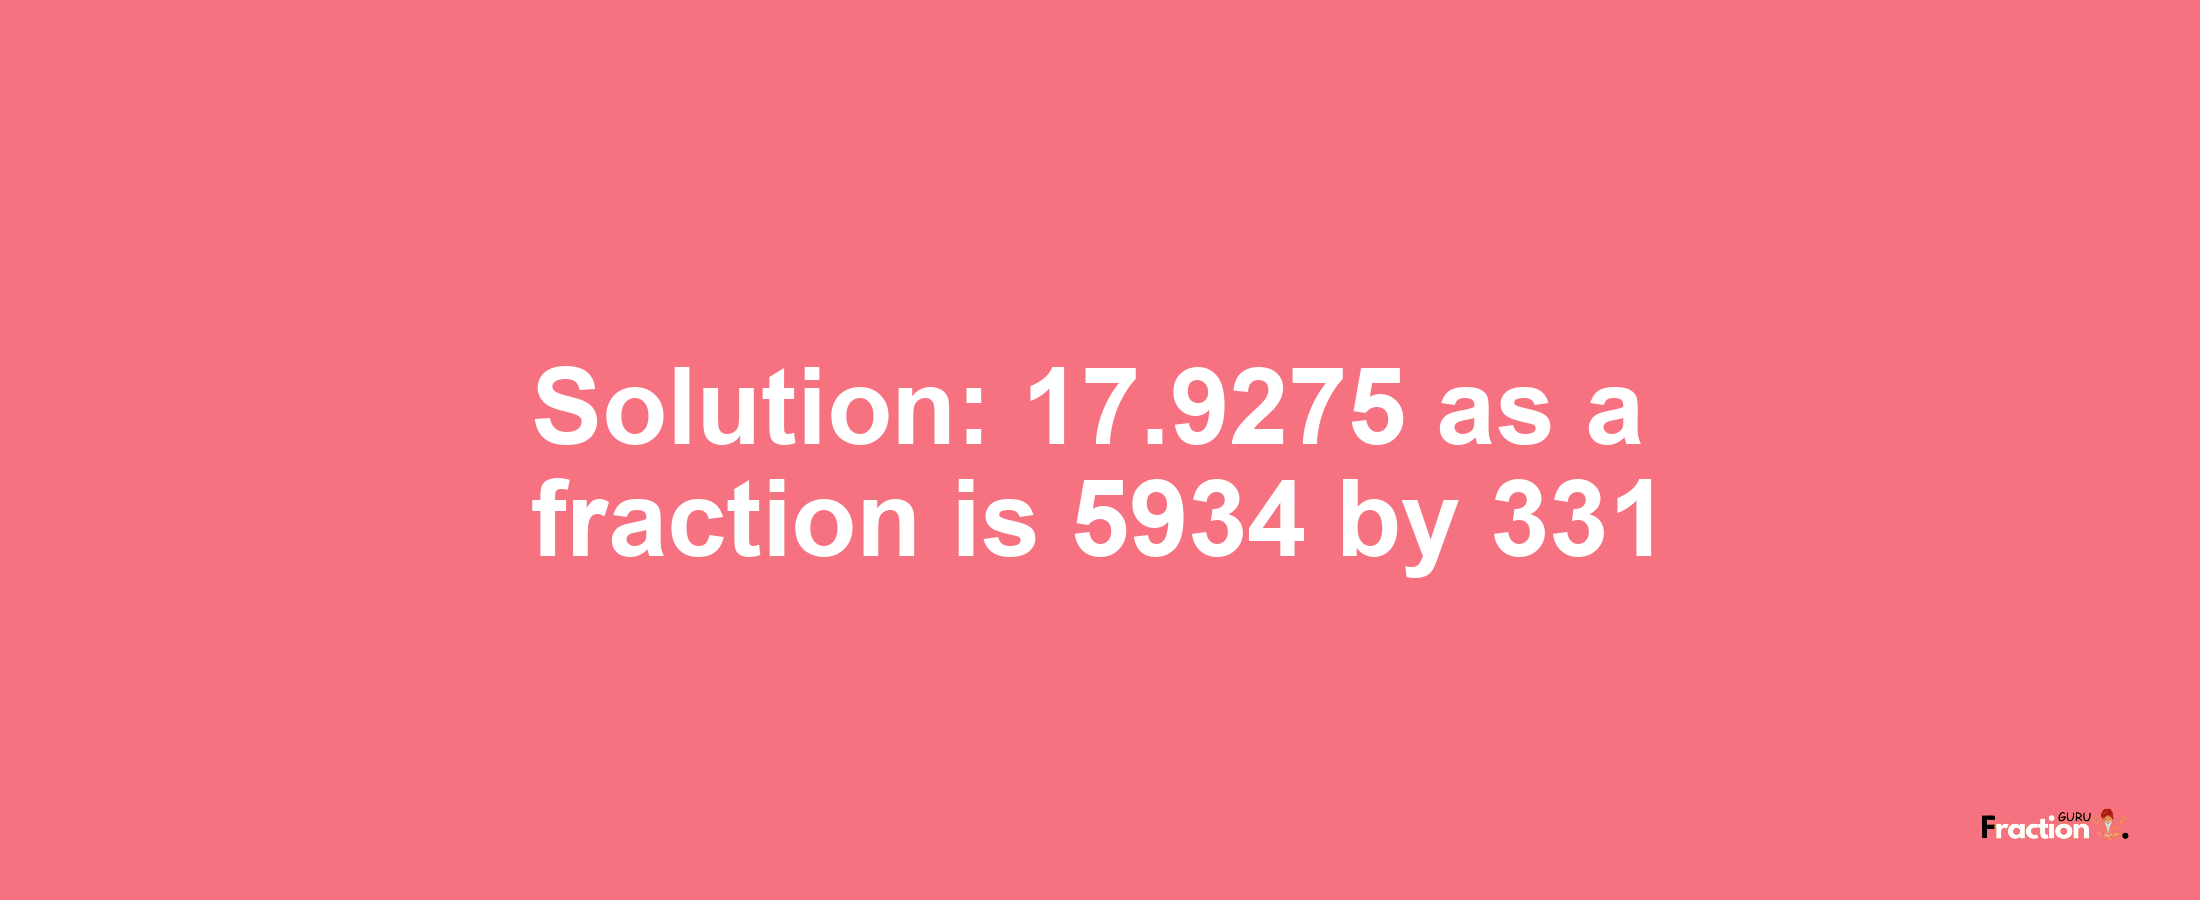 Solution:17.9275 as a fraction is 5934/331